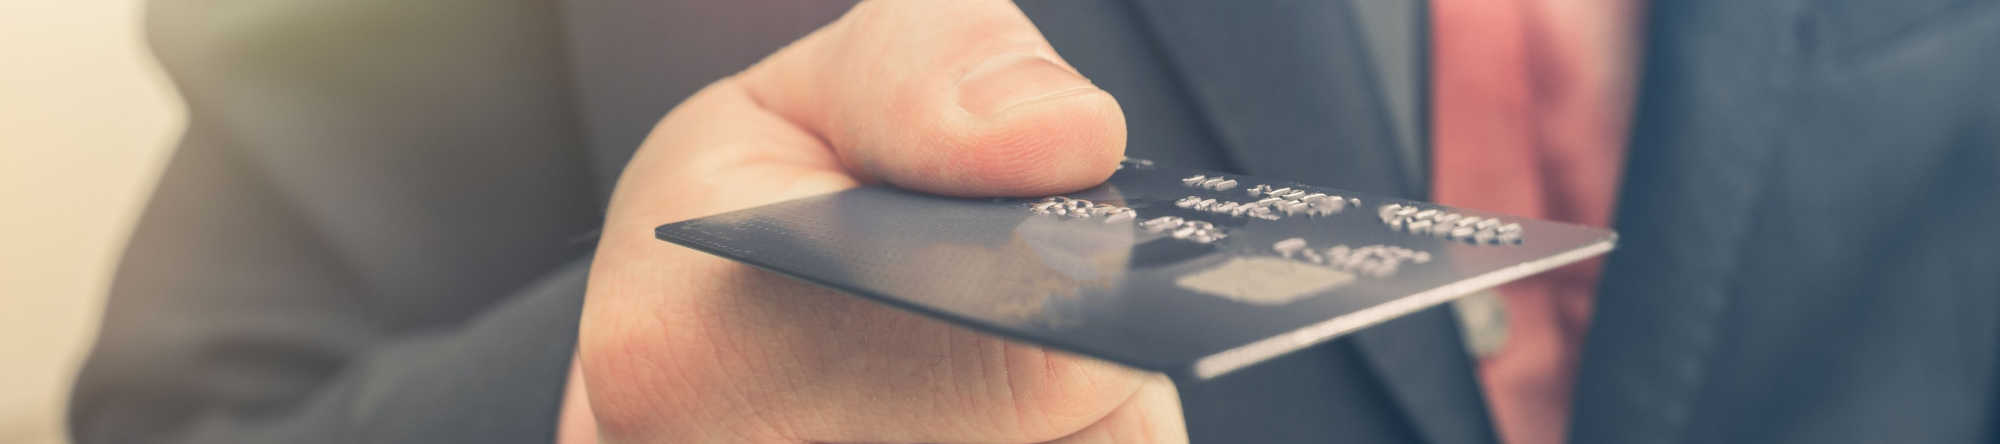 image-of-credit-card-processing